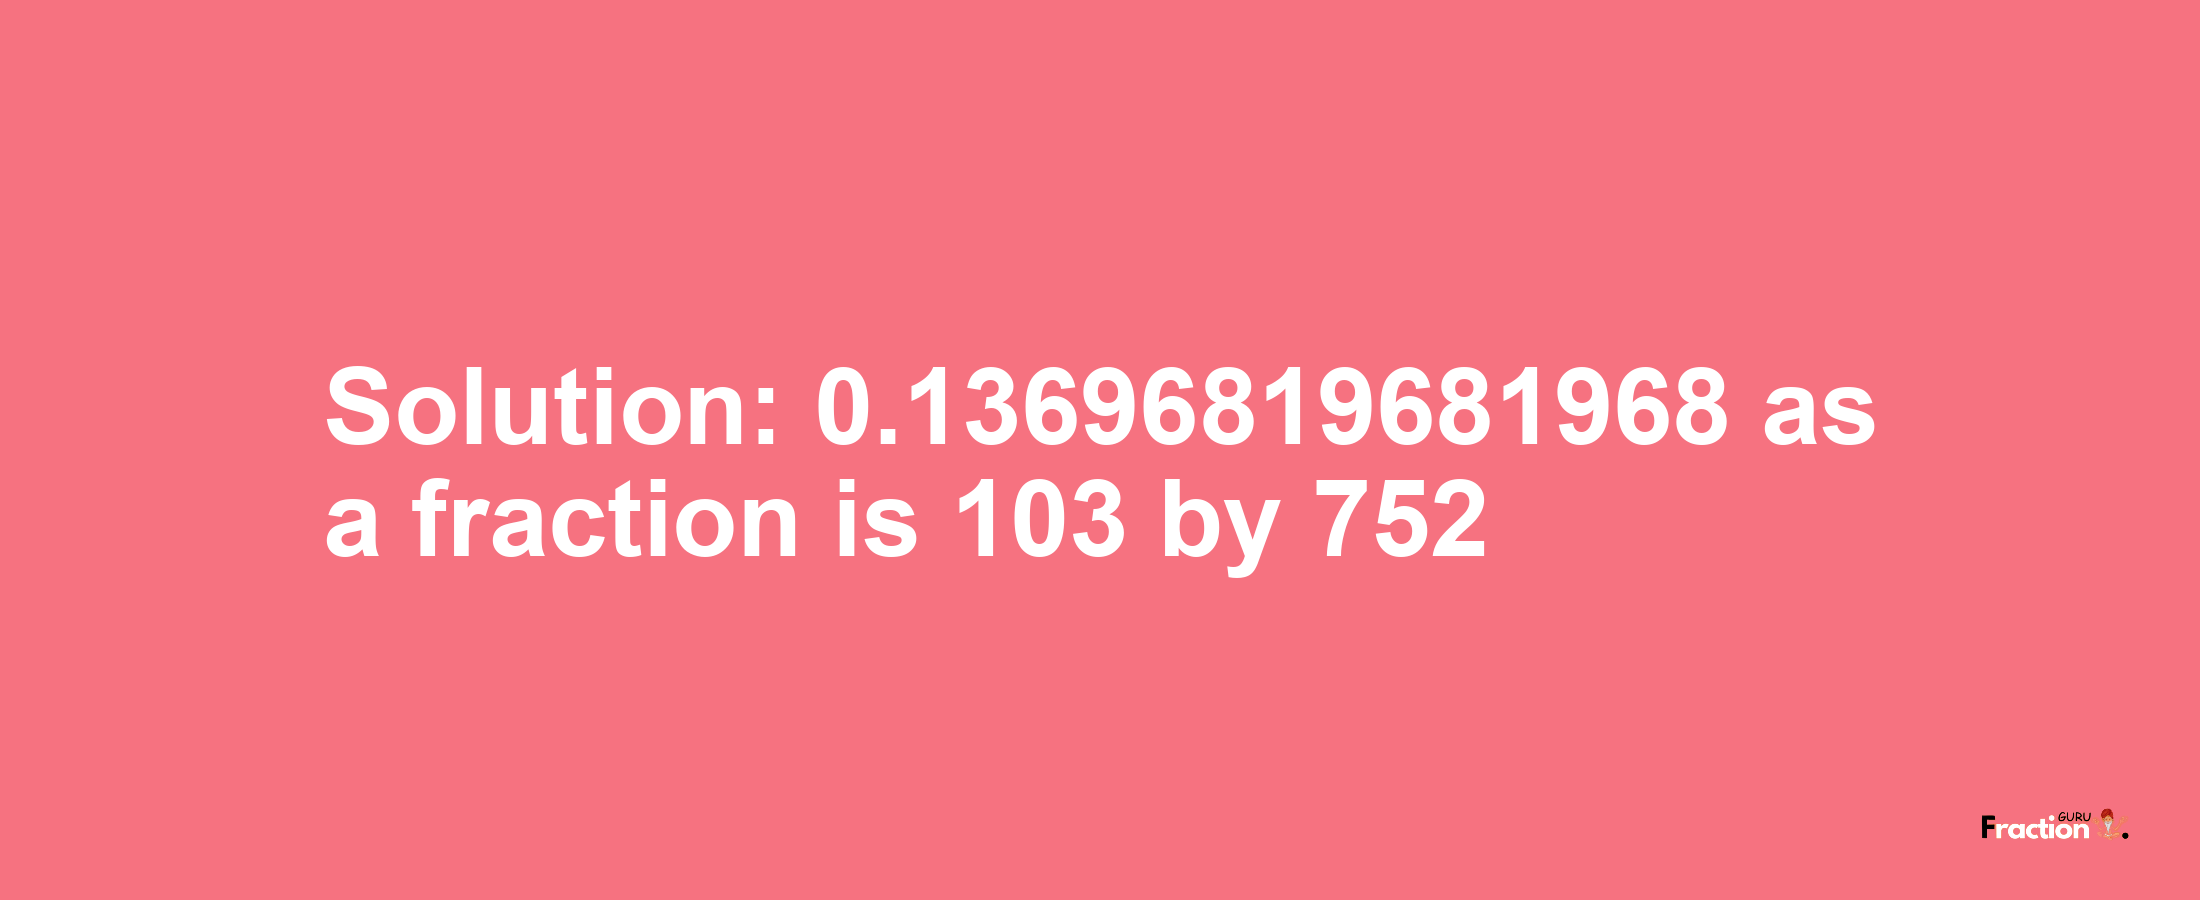 Solution:0.13696819681968 as a fraction is 103/752